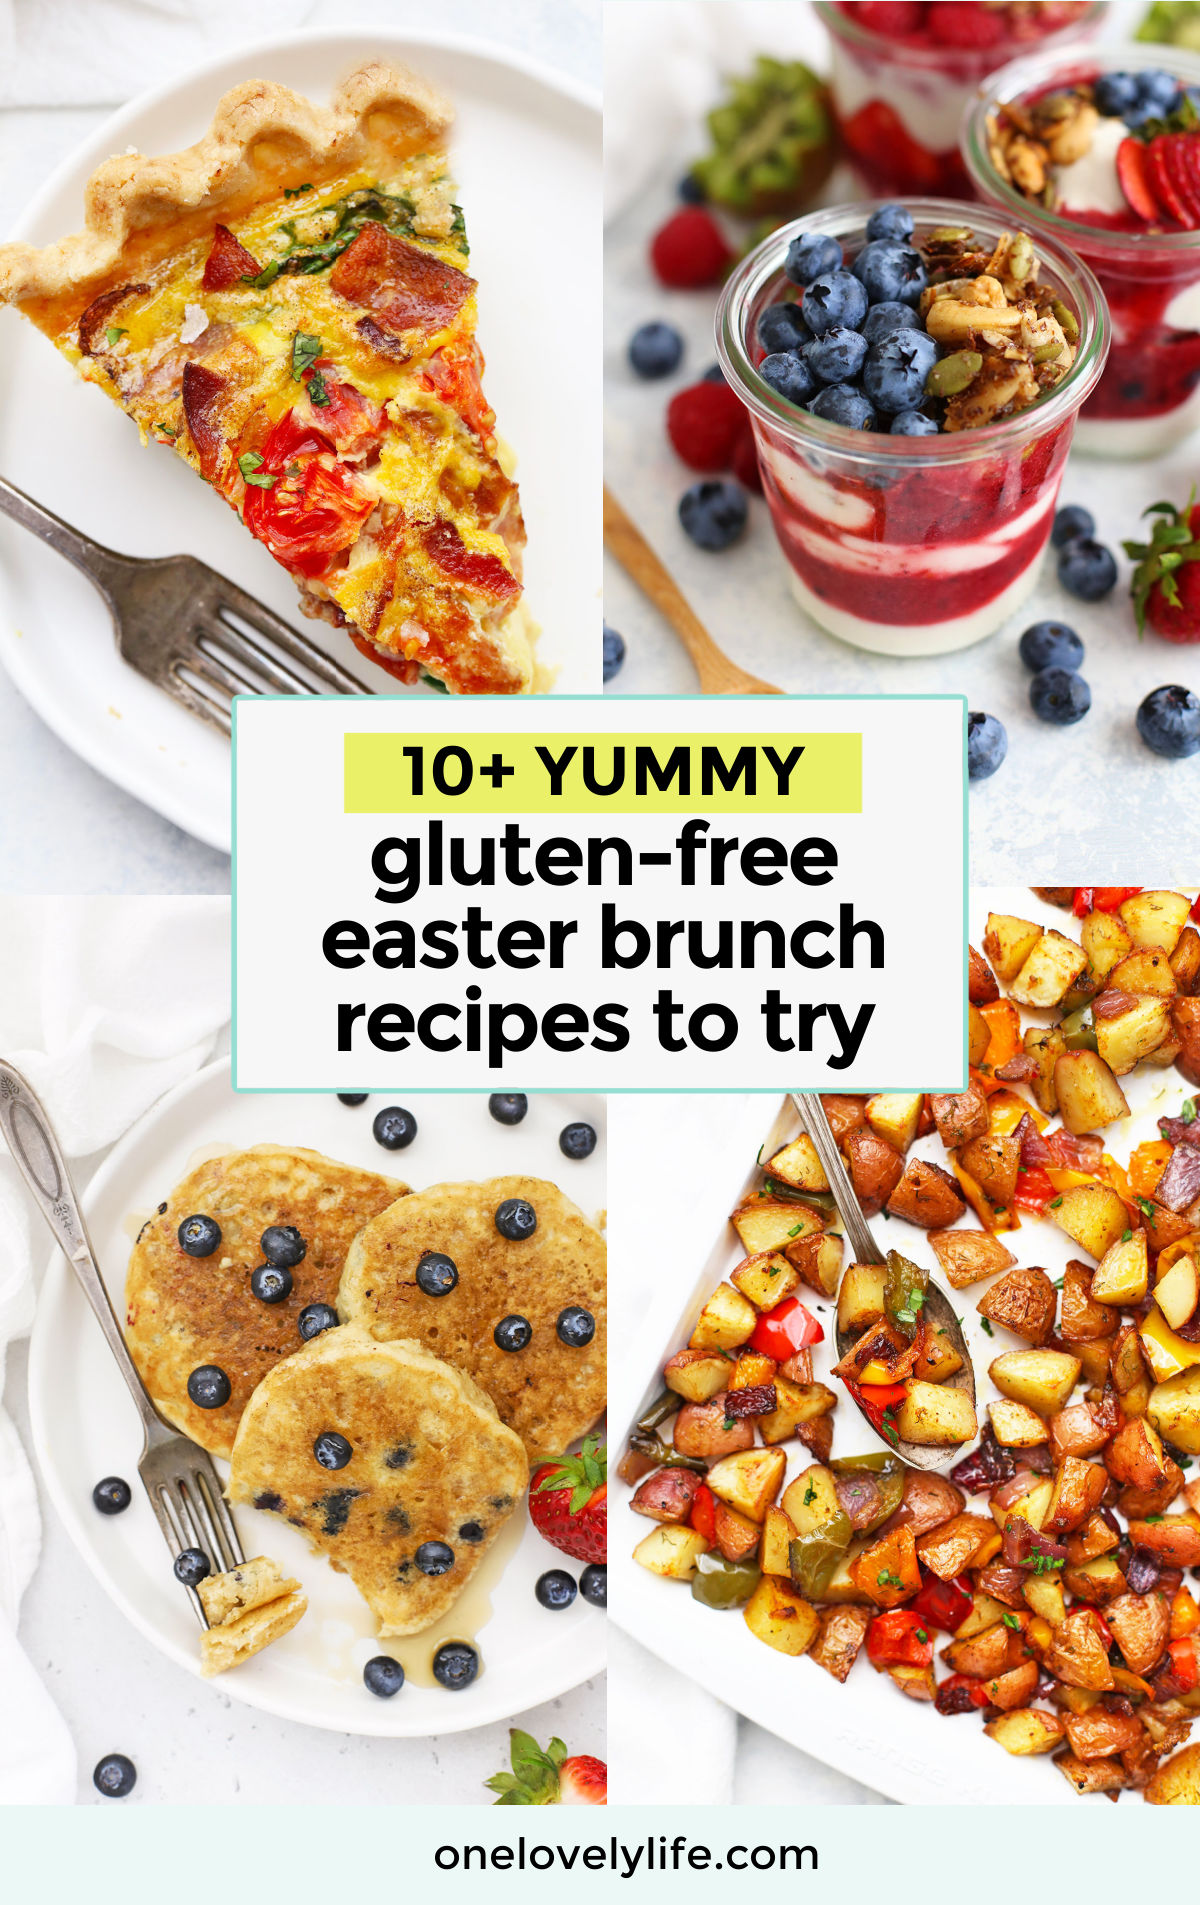 Planning a gluten-free Easter menu this year? We've got 20+ delicious gluten-free Easter recipes for brunch, dinner, and dessert. / gluten-free Easter menu ideas / gluten-free Easter brunch recipes / gluten-free Easter dinner recipes / gluten-free Easter menu recipes / gluten-free recipes for Easter dinner / gluten-free recipes for Easter brunch / gluten-free Easter ideas / what to serve for Easter dinner / gluten-free Easter dessert / Gluten-free Easter breakfast ideas